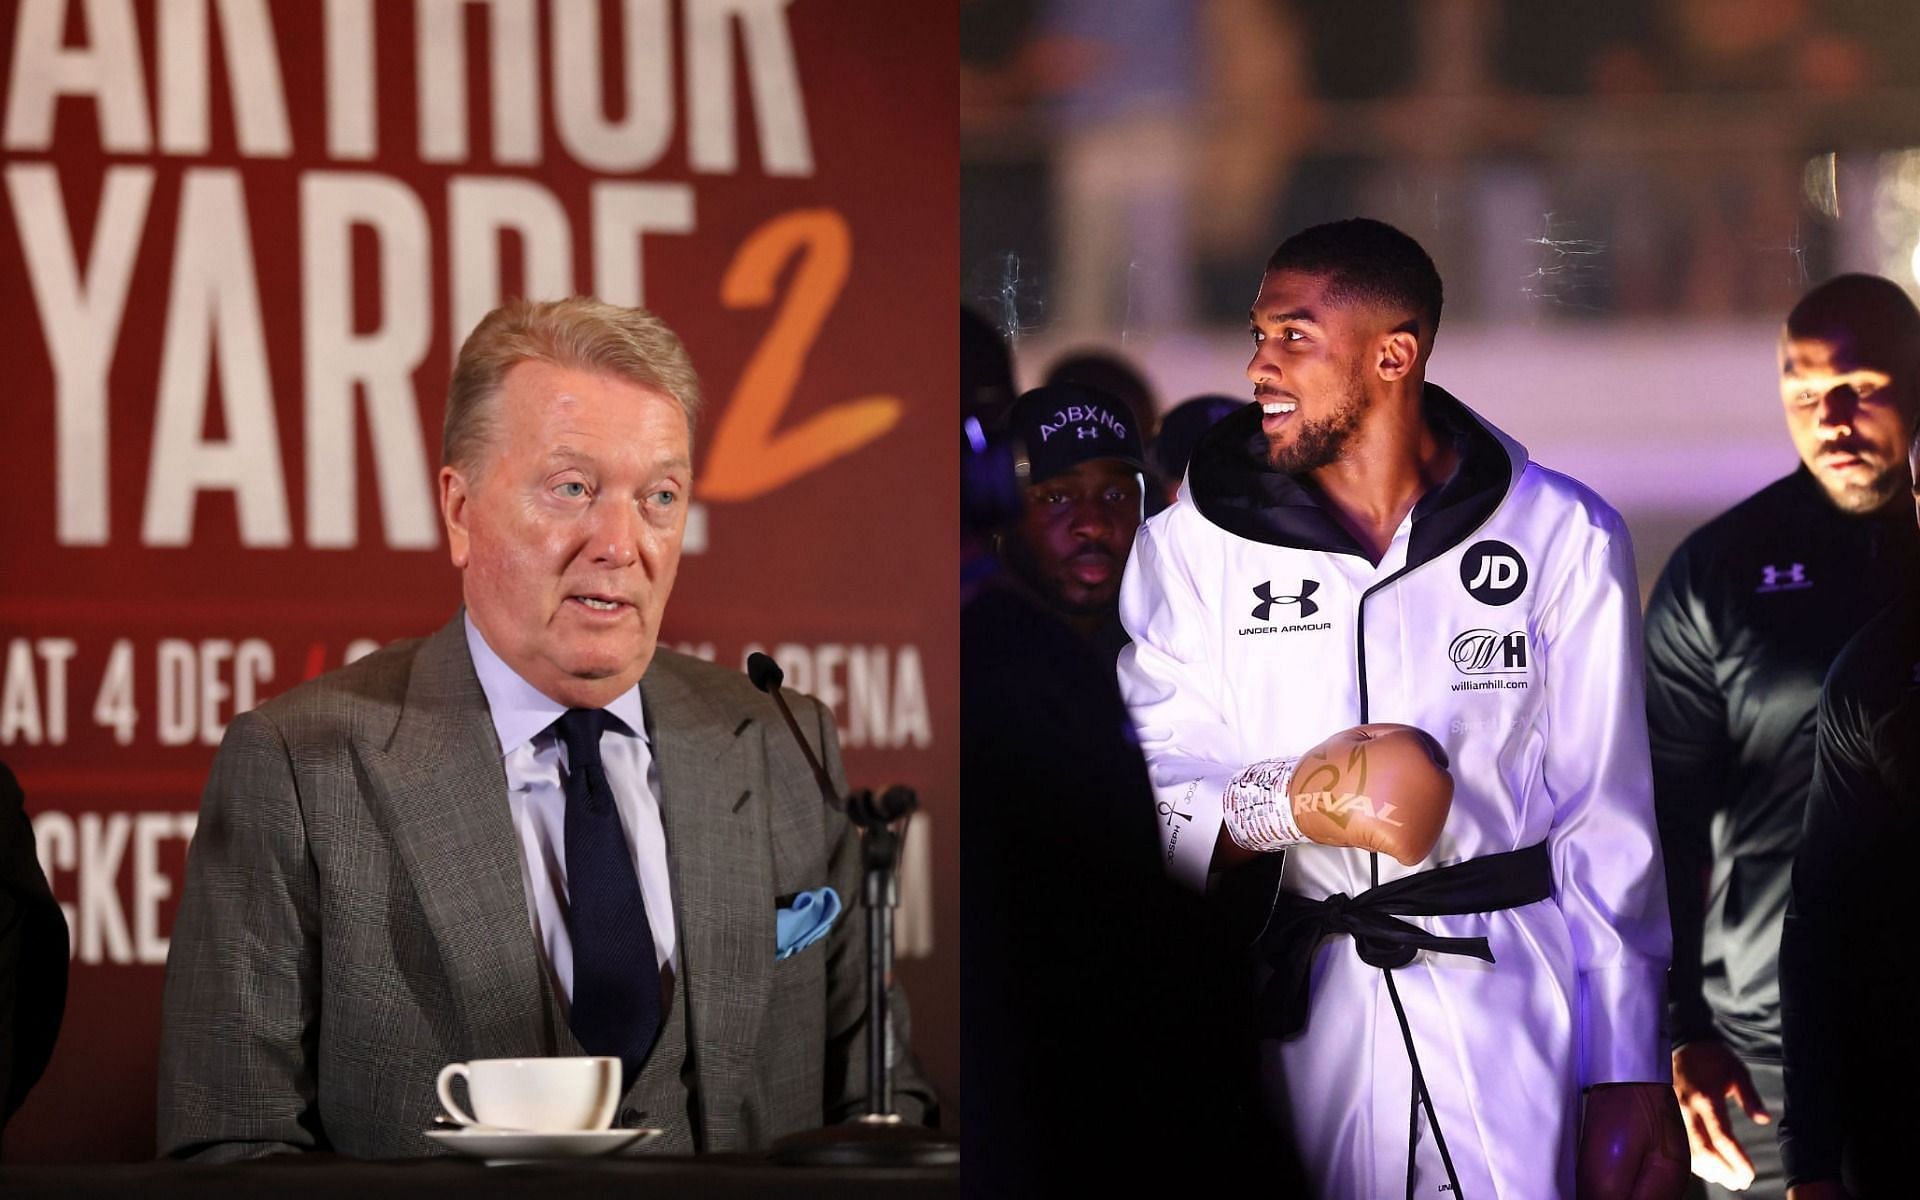 Anthony Joshua (R) priced himself out according to Frank Warren (L)